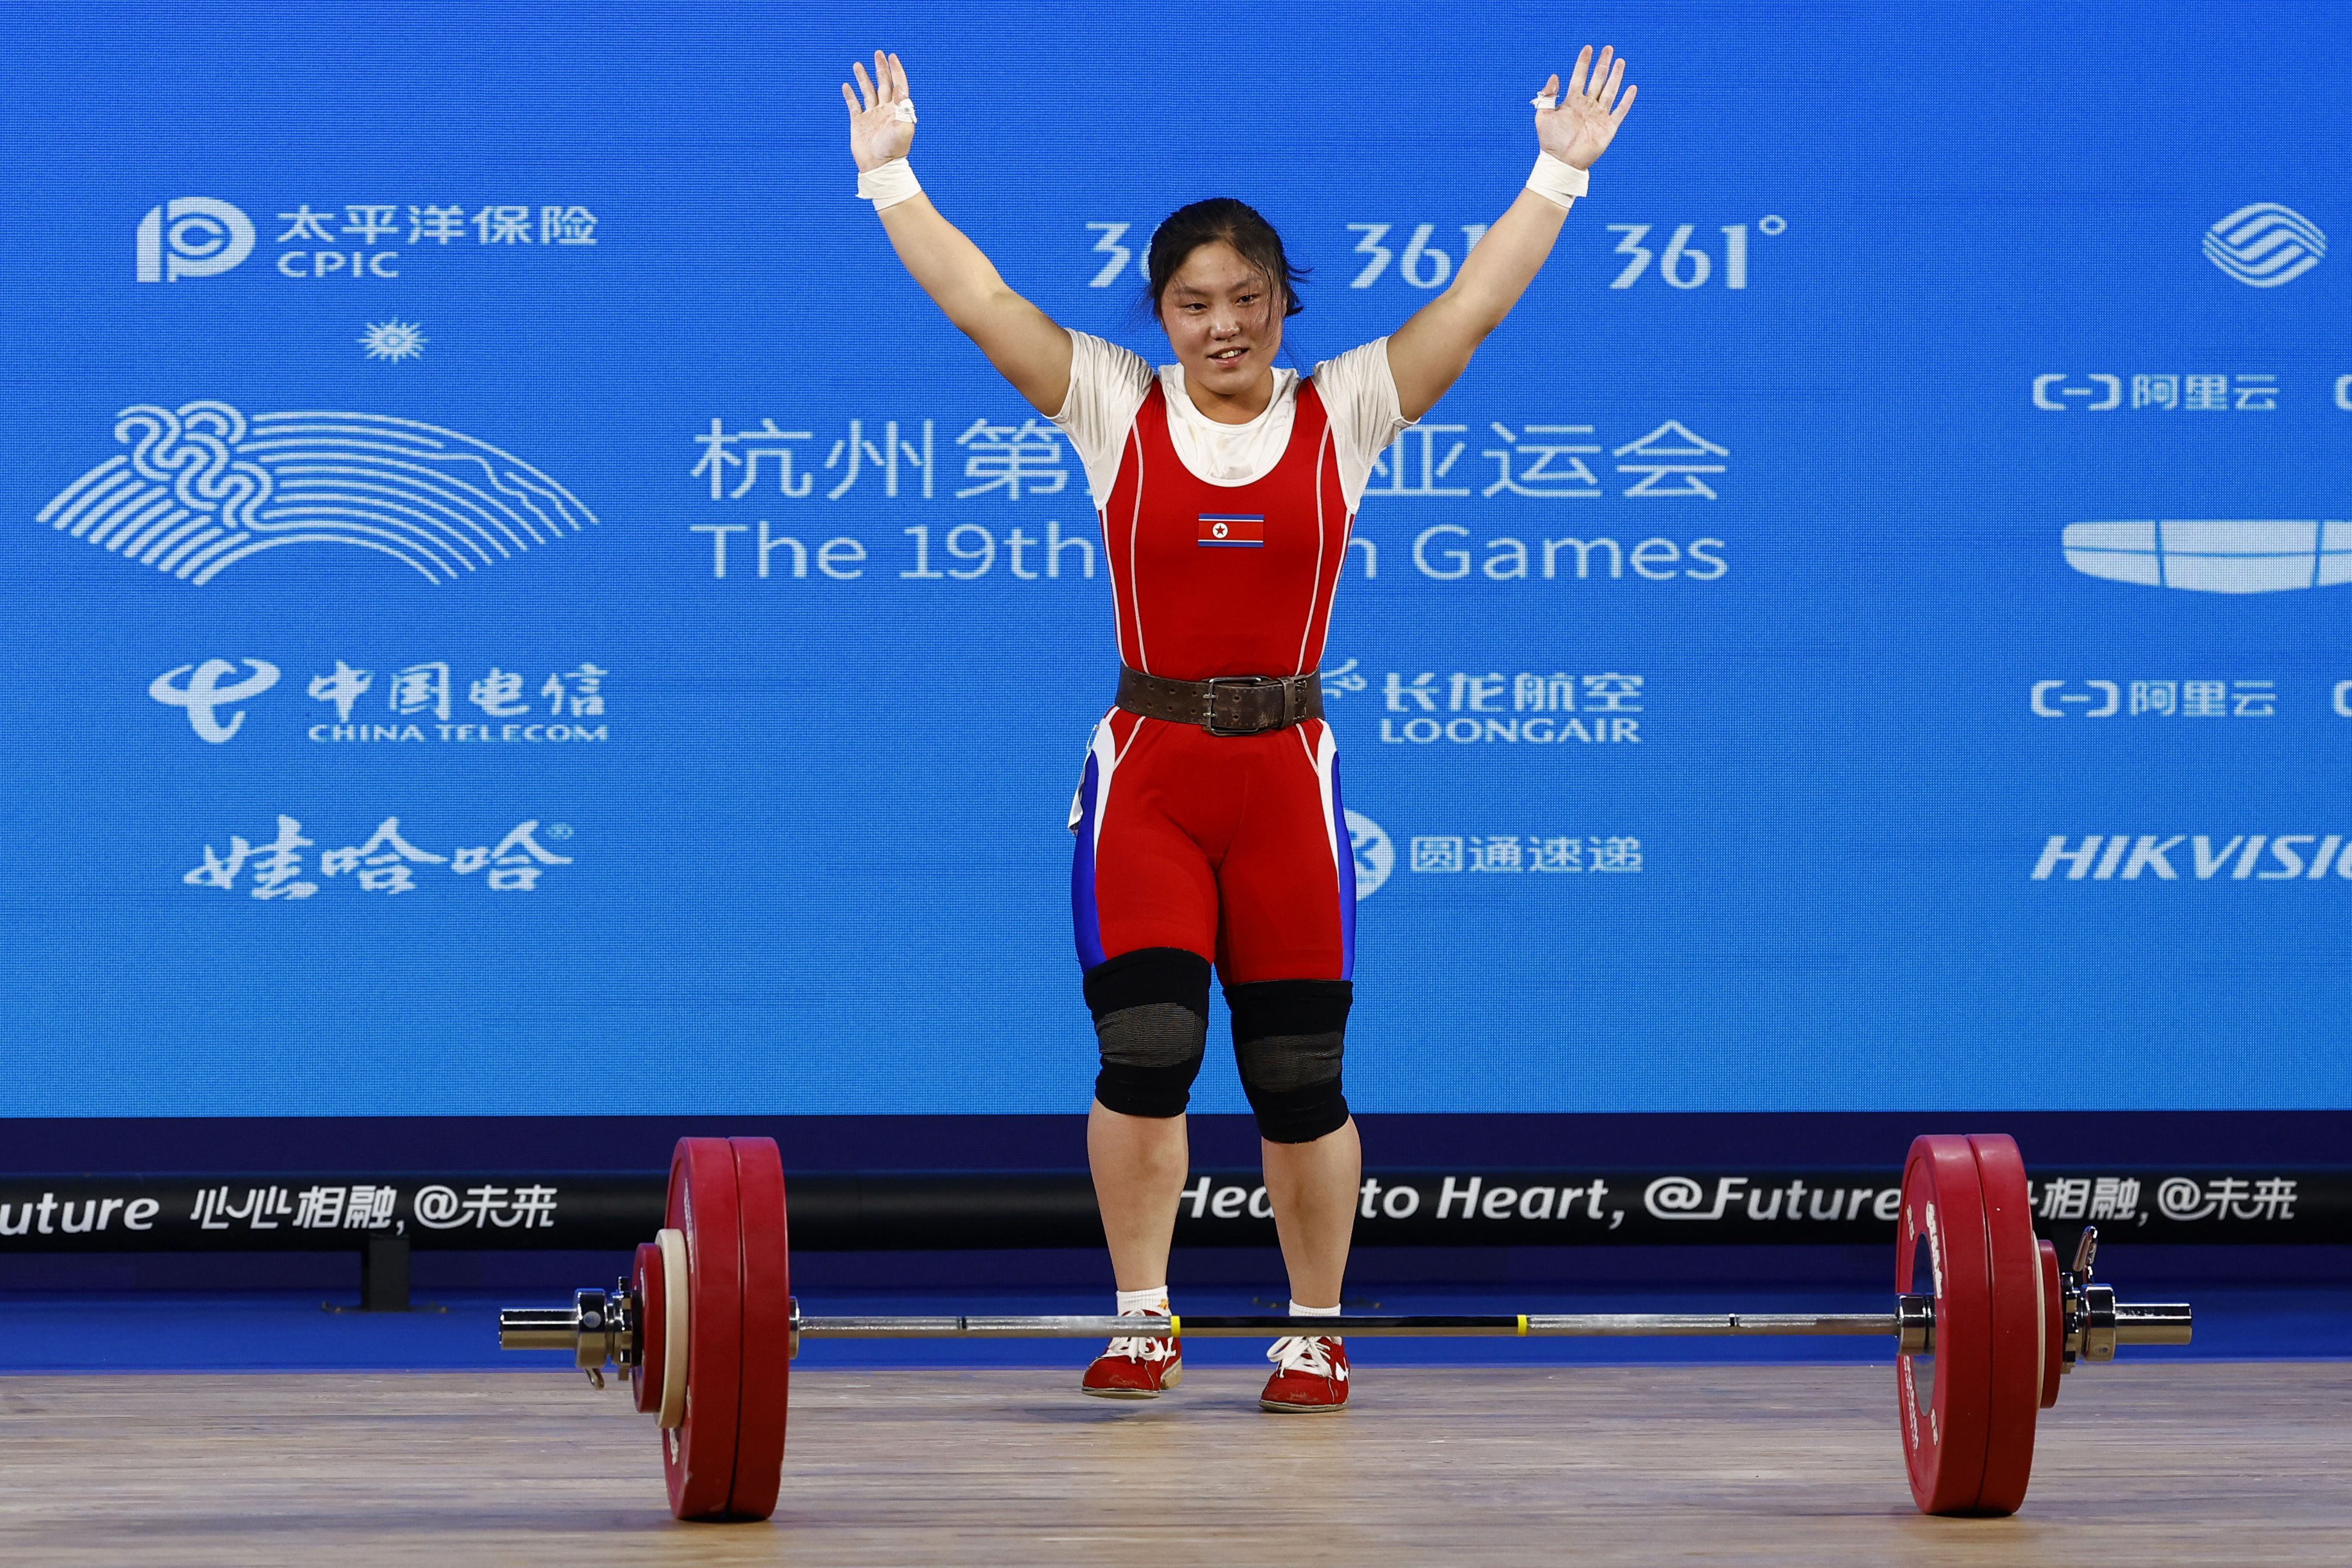 North Korean weightlifter sets new world record in Hangzhou | Reuters